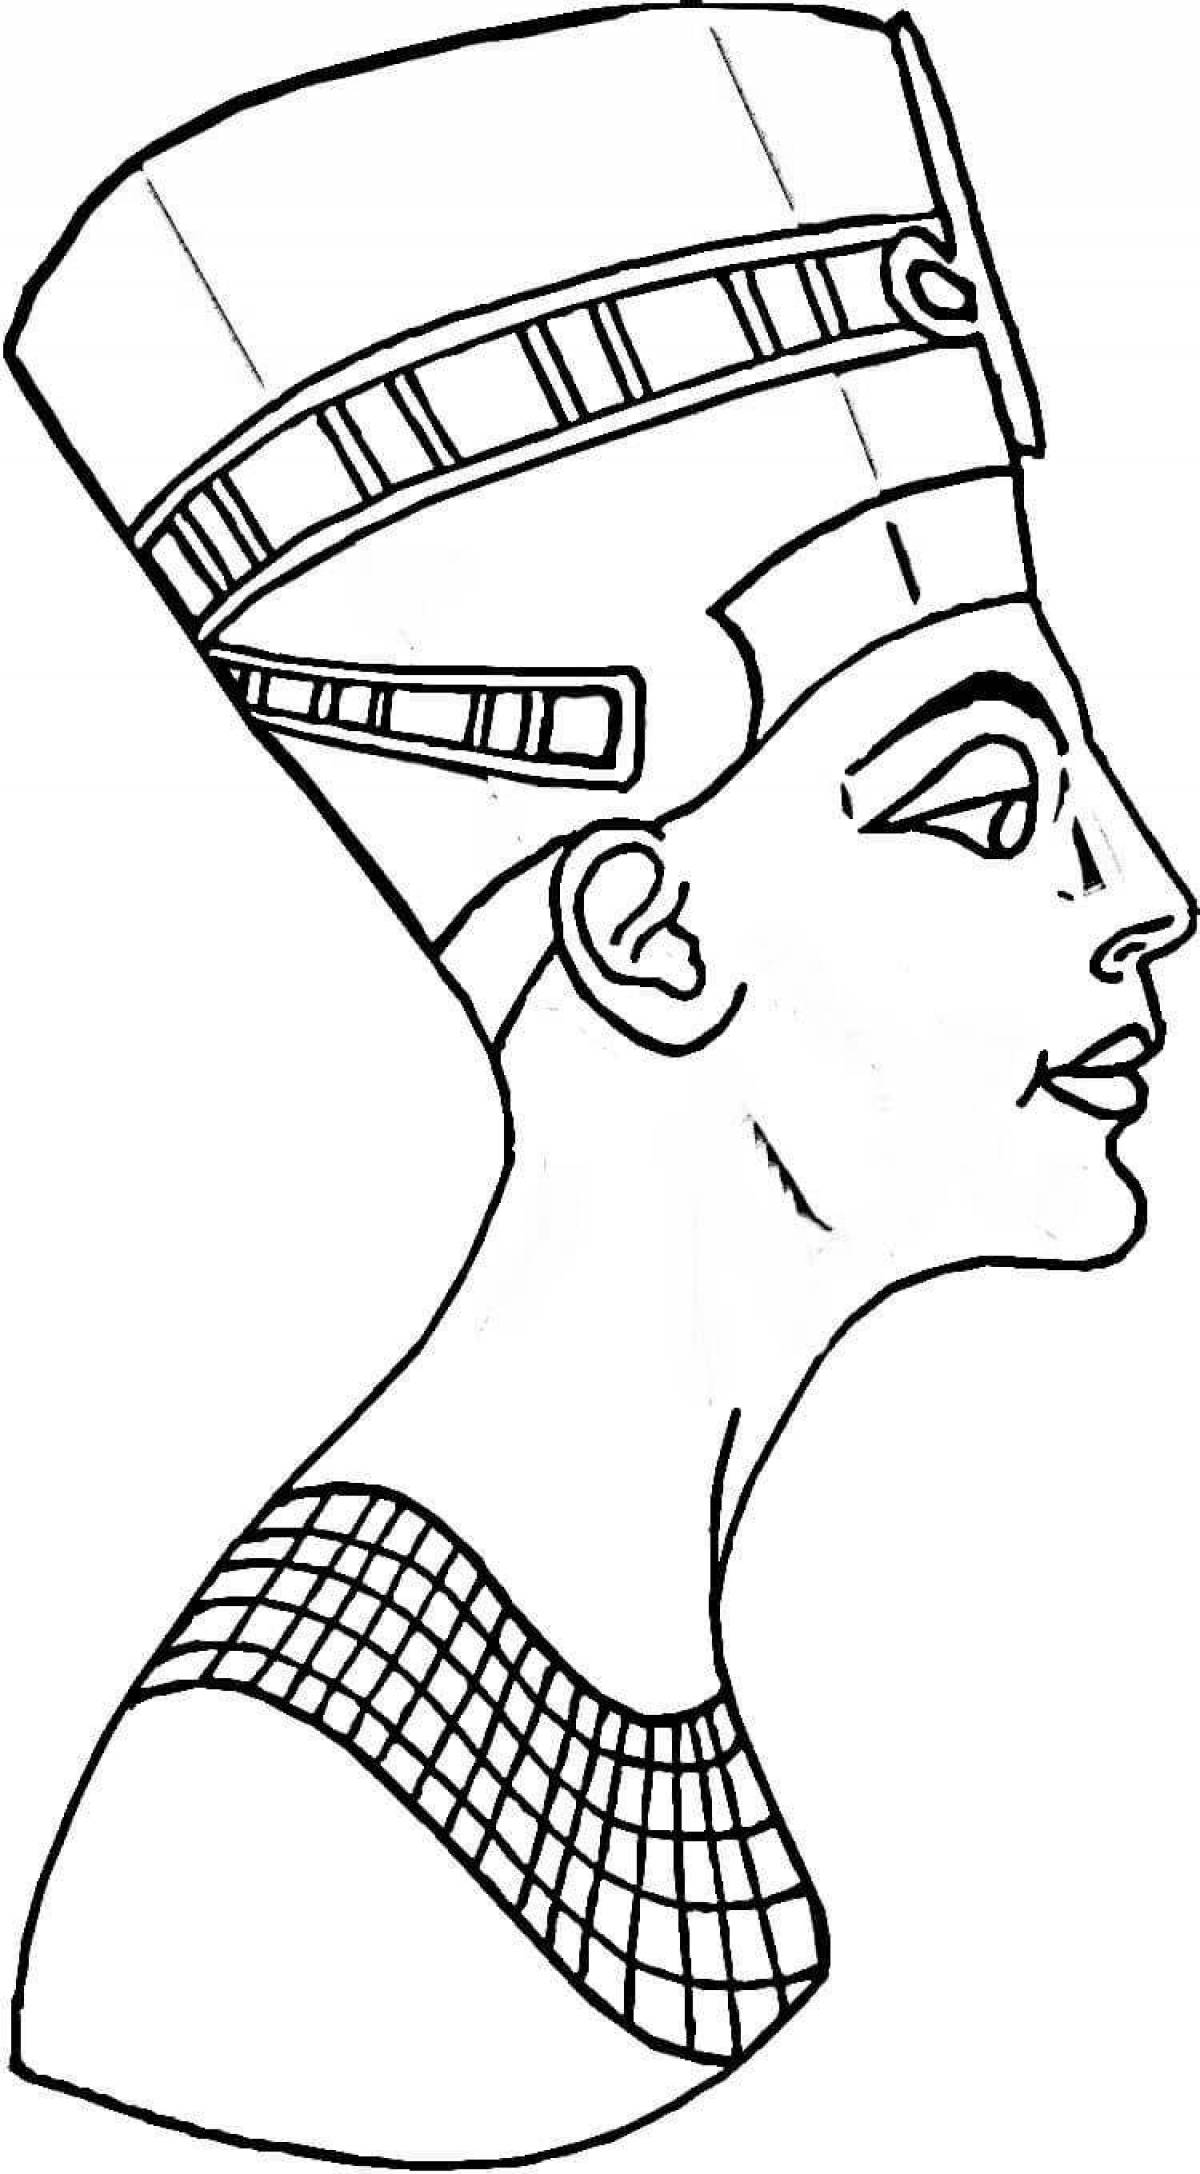 Glamorous coloring of ancient Egyptian jewelry